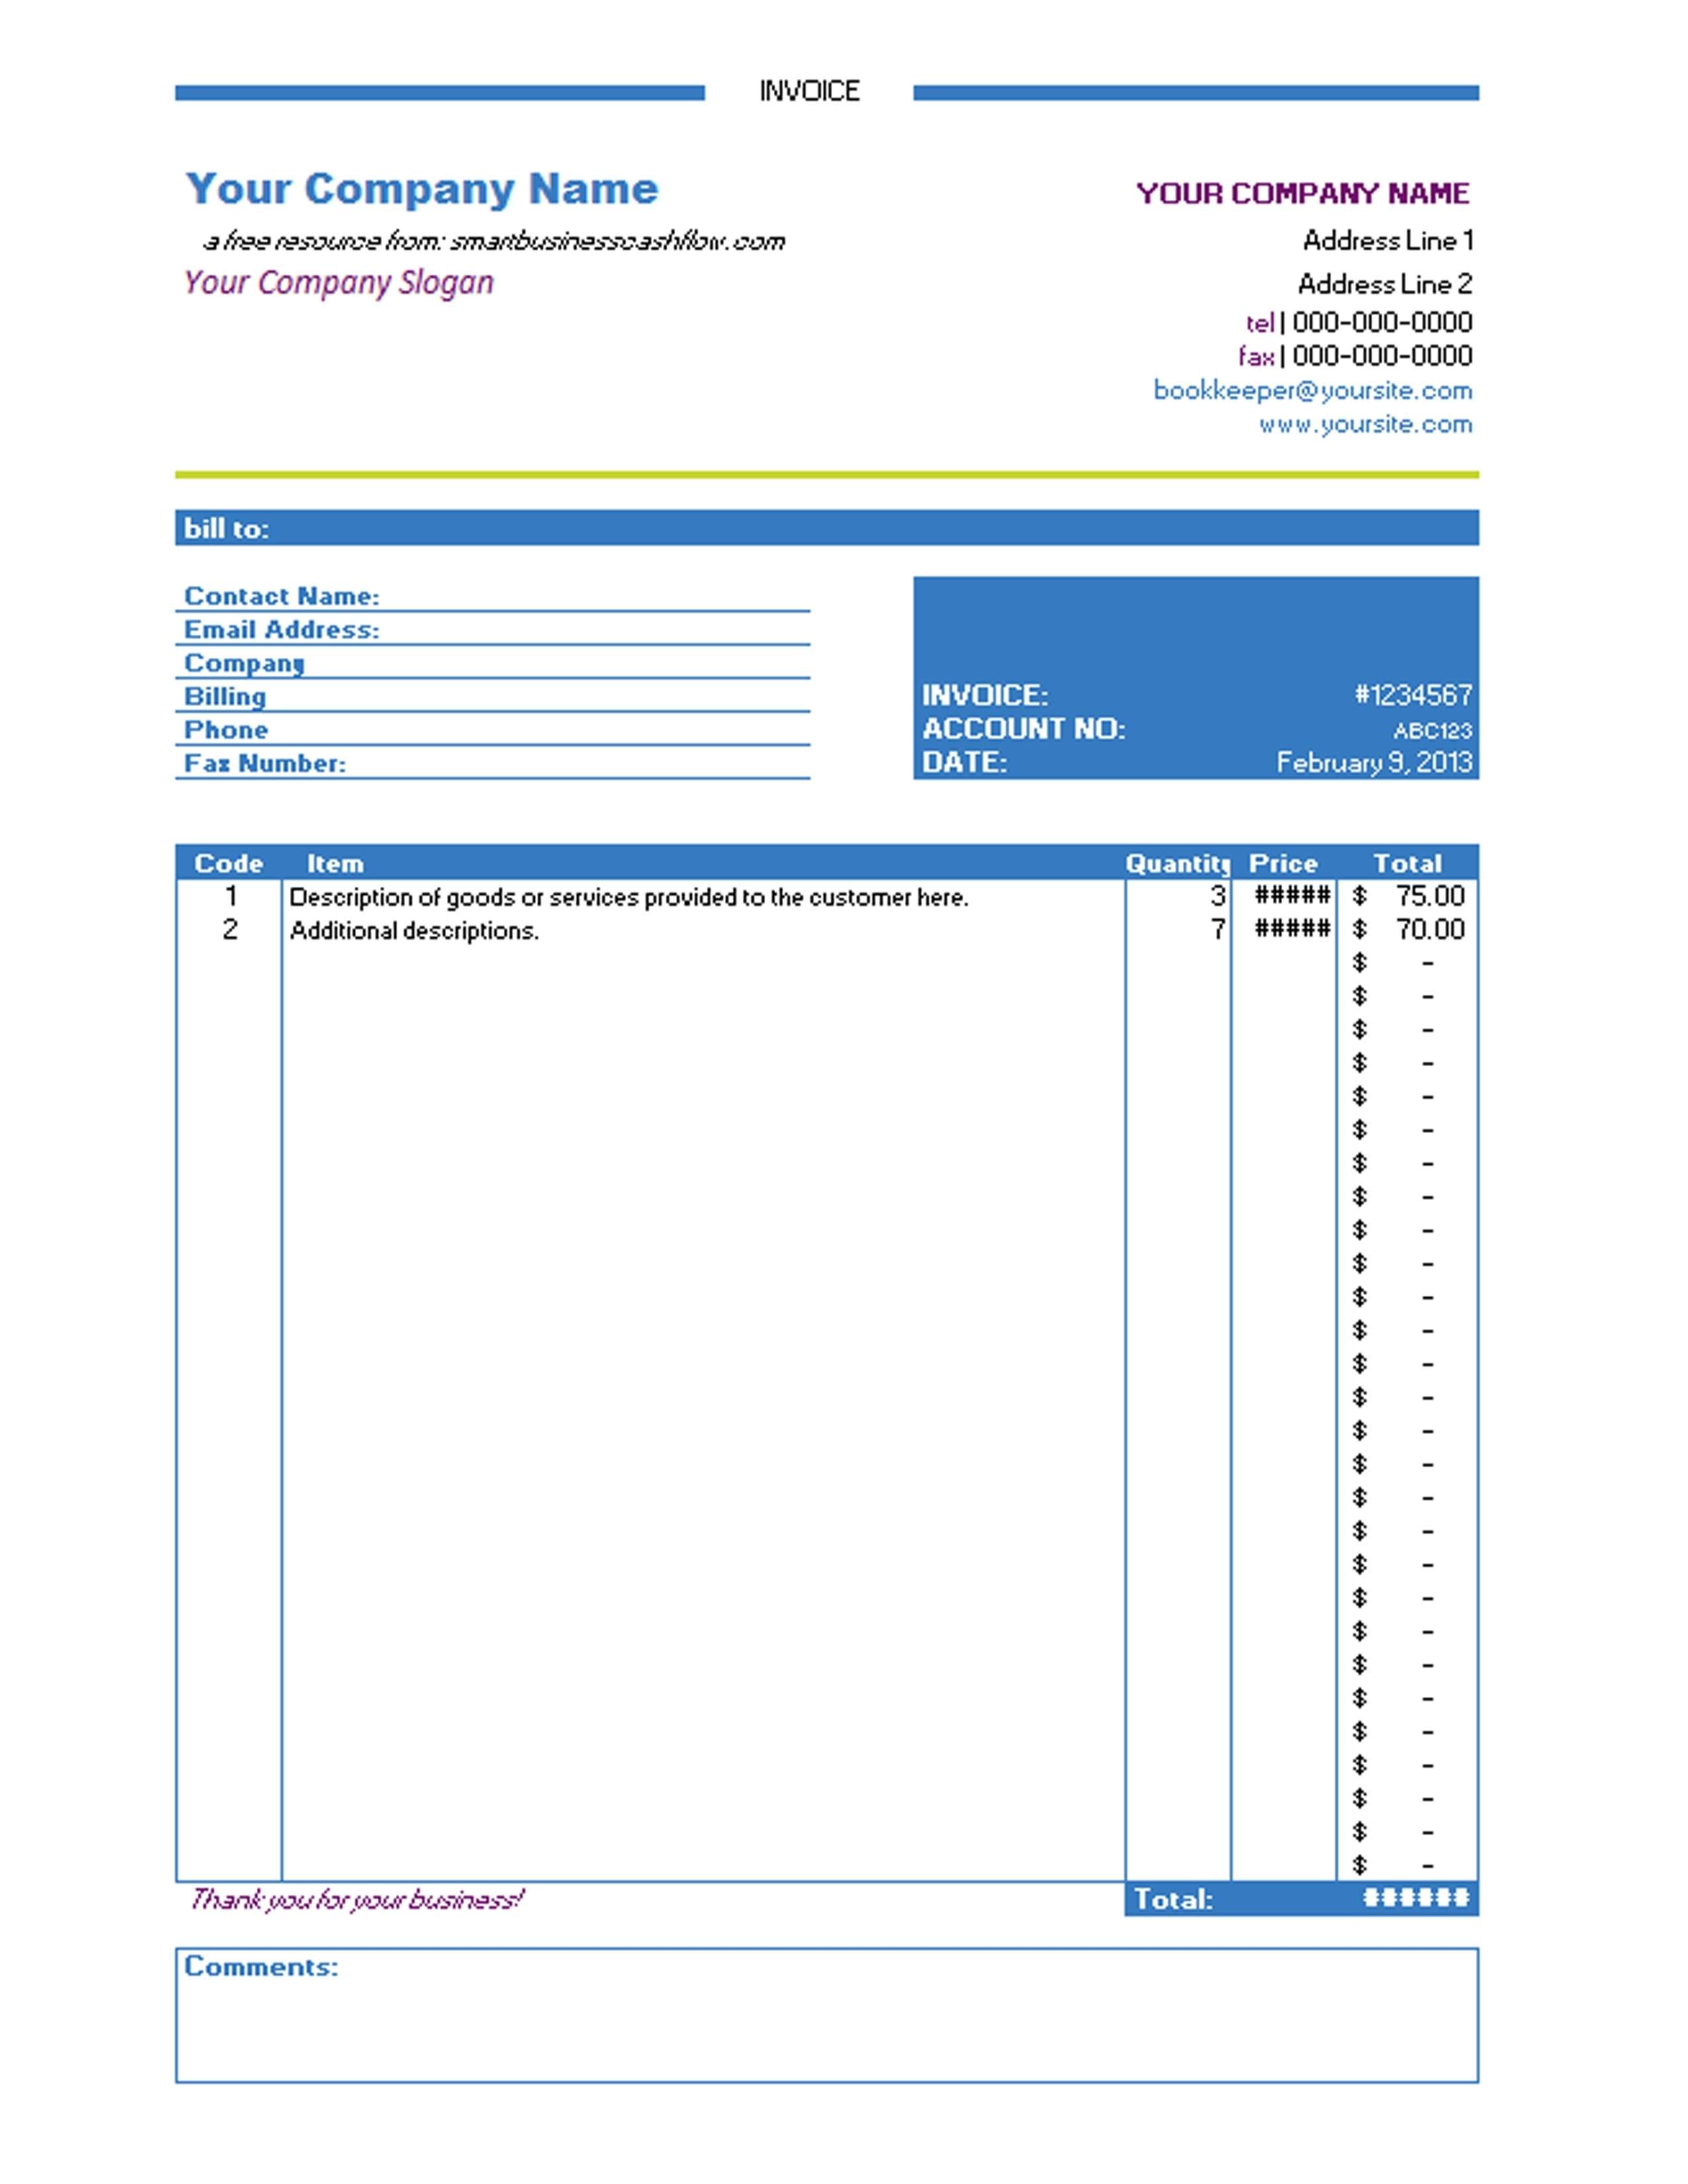 invoice excel download invoice excel template free invoice template free 2016 2550 X 3300